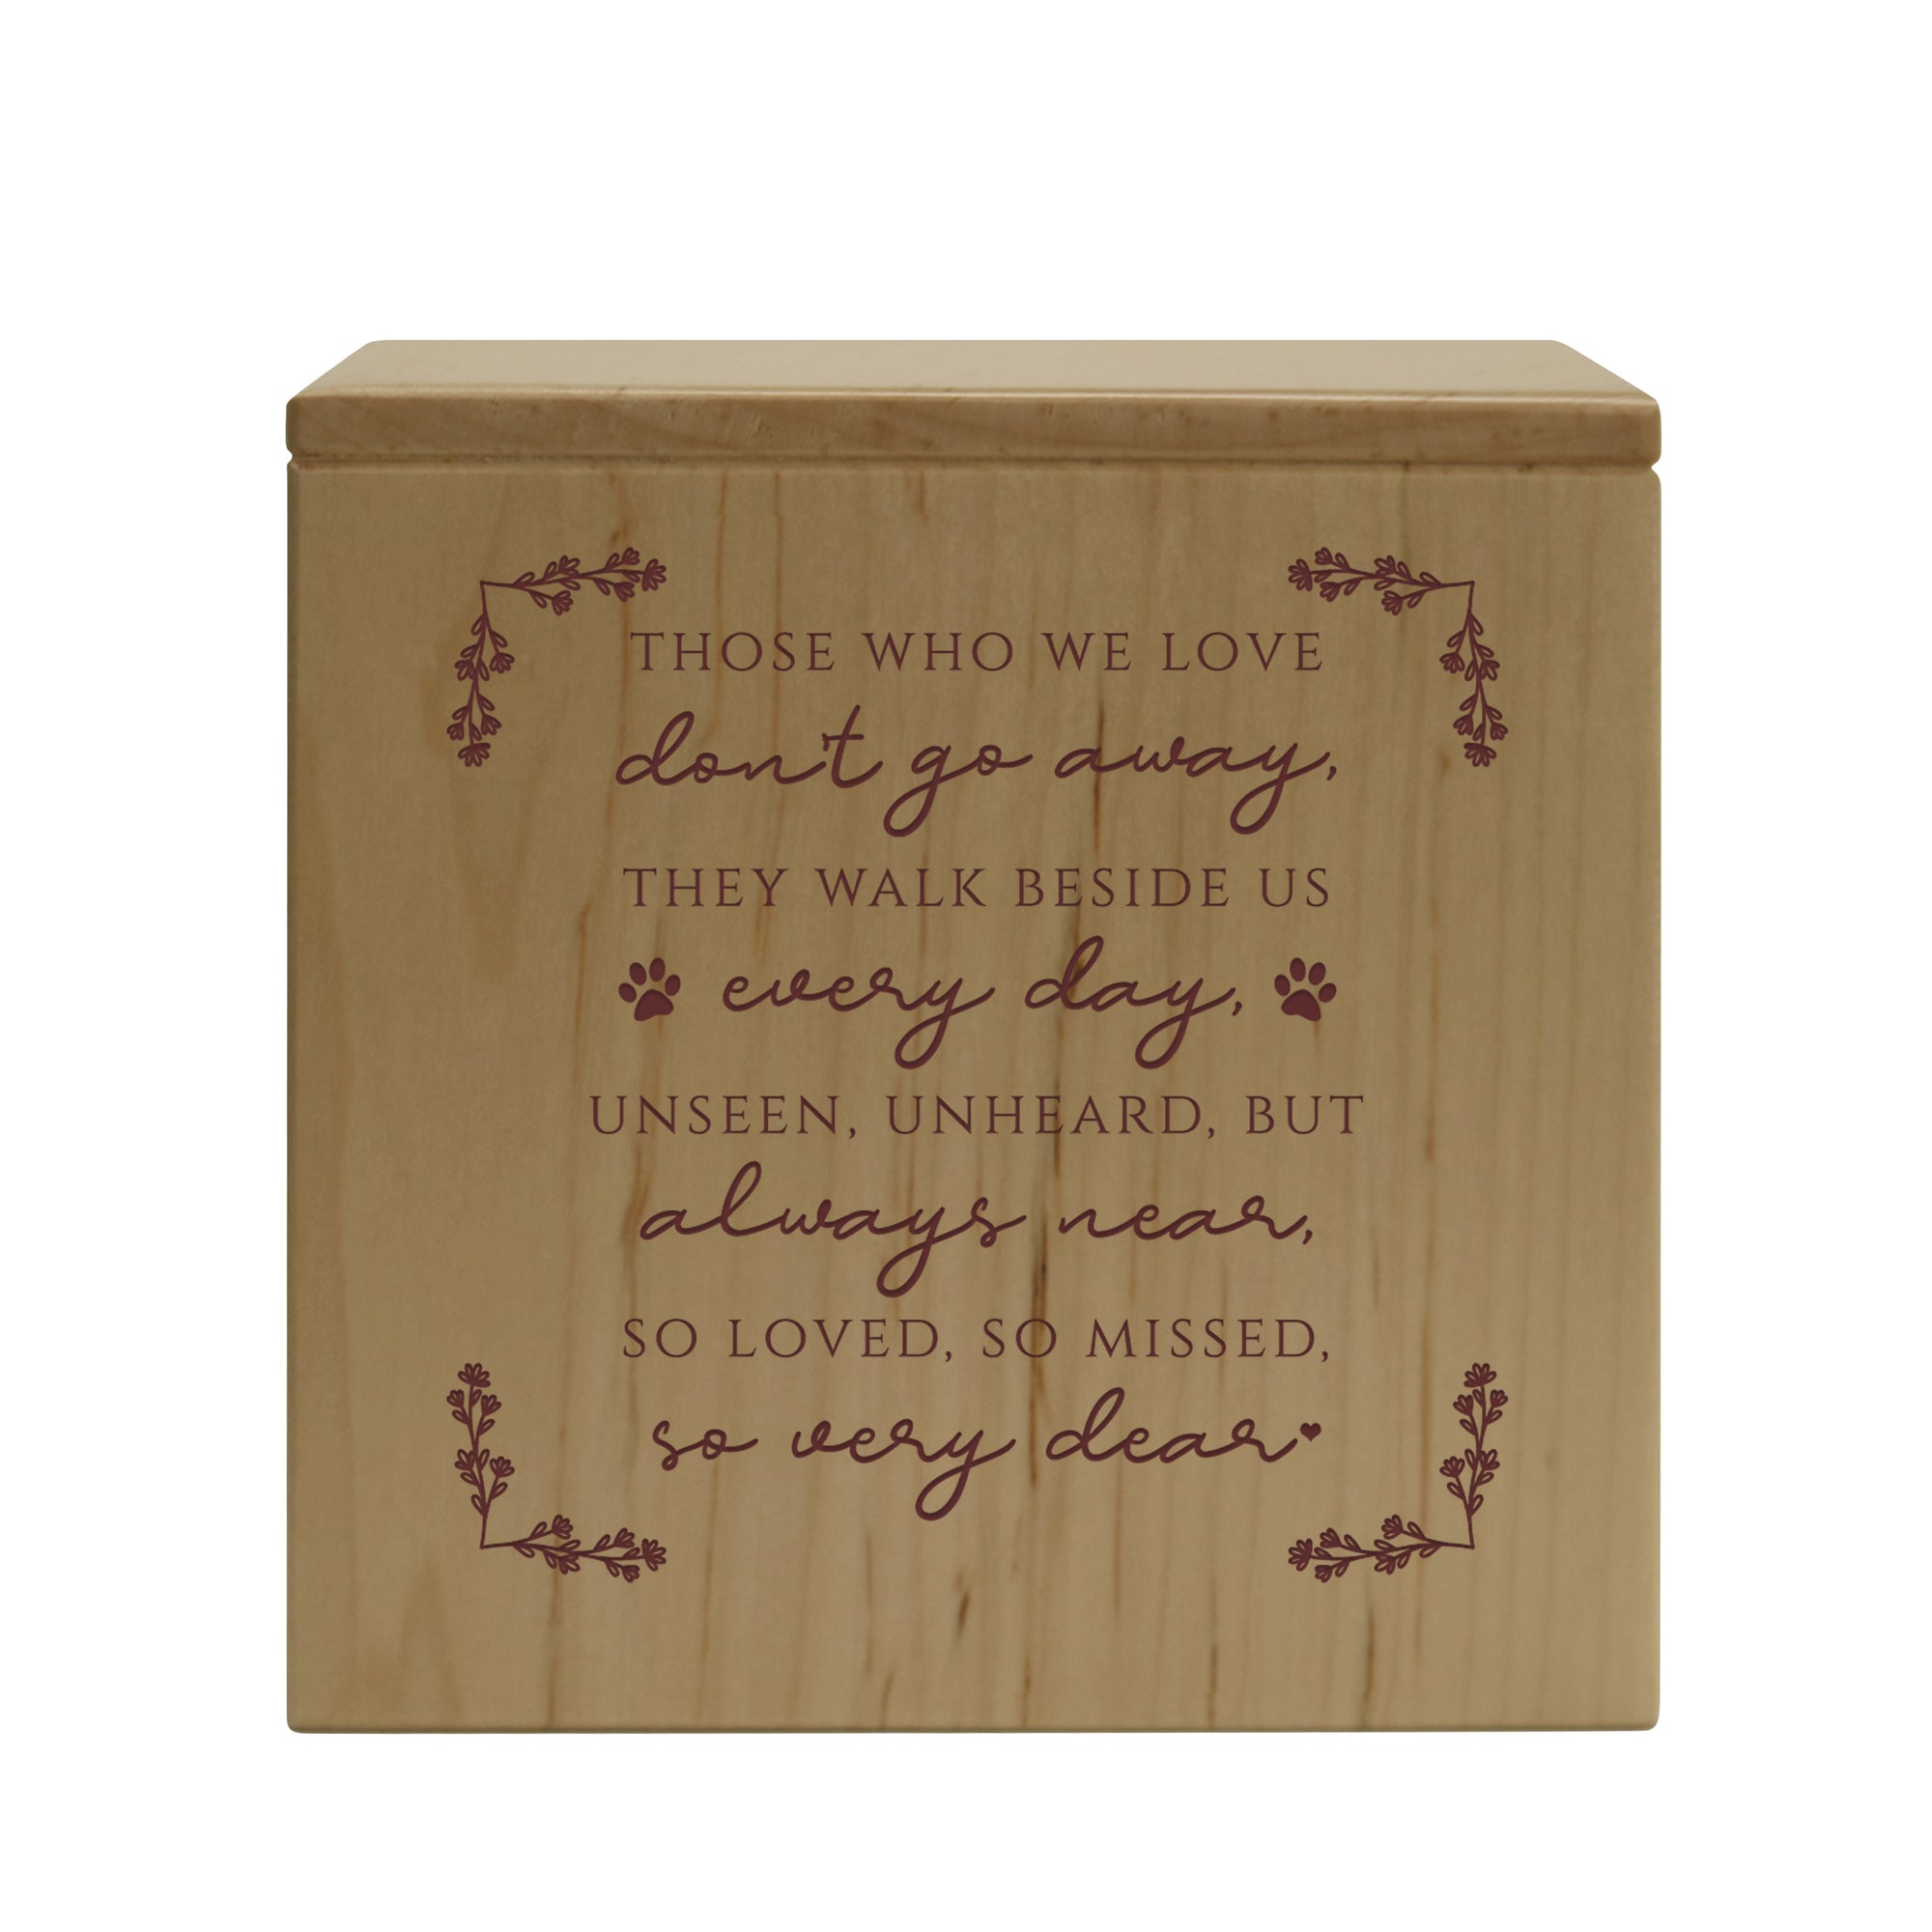 Exquisite wooden pet urn designed to hold your pet's ashes with grace and dignity.